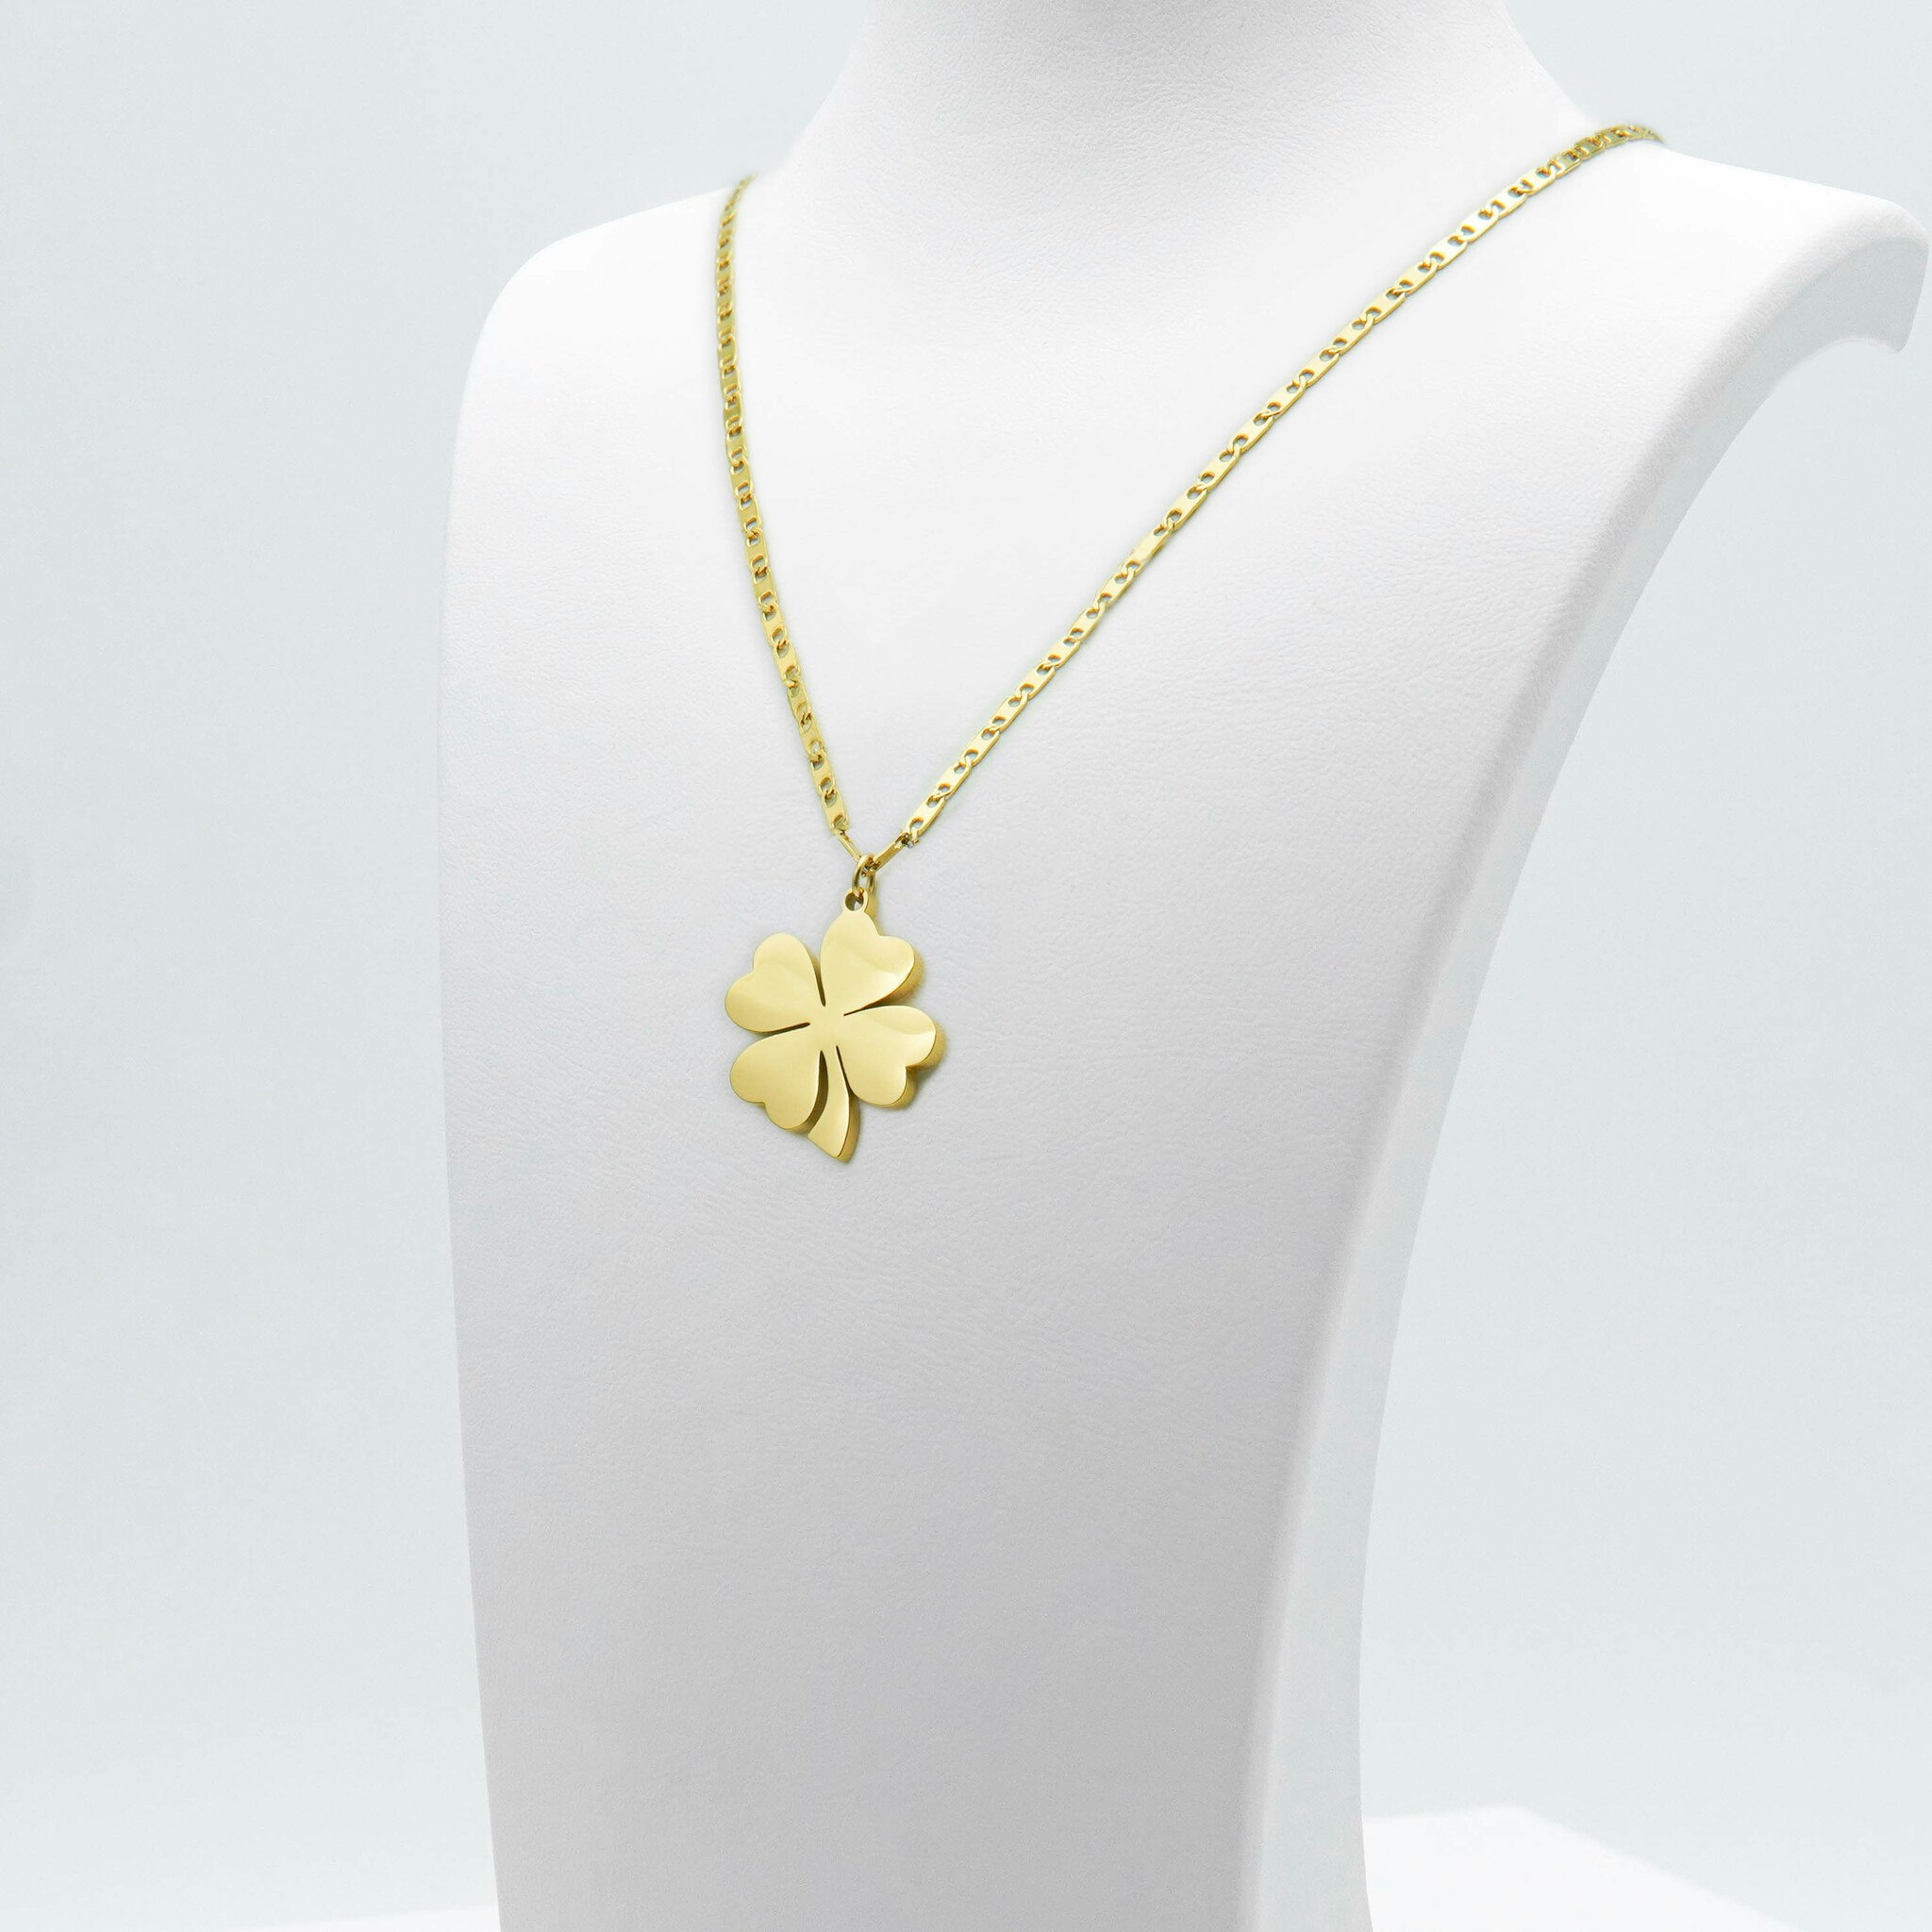 Clover Power Of Solo - Gold Edition Necklace Women - SWEVALI